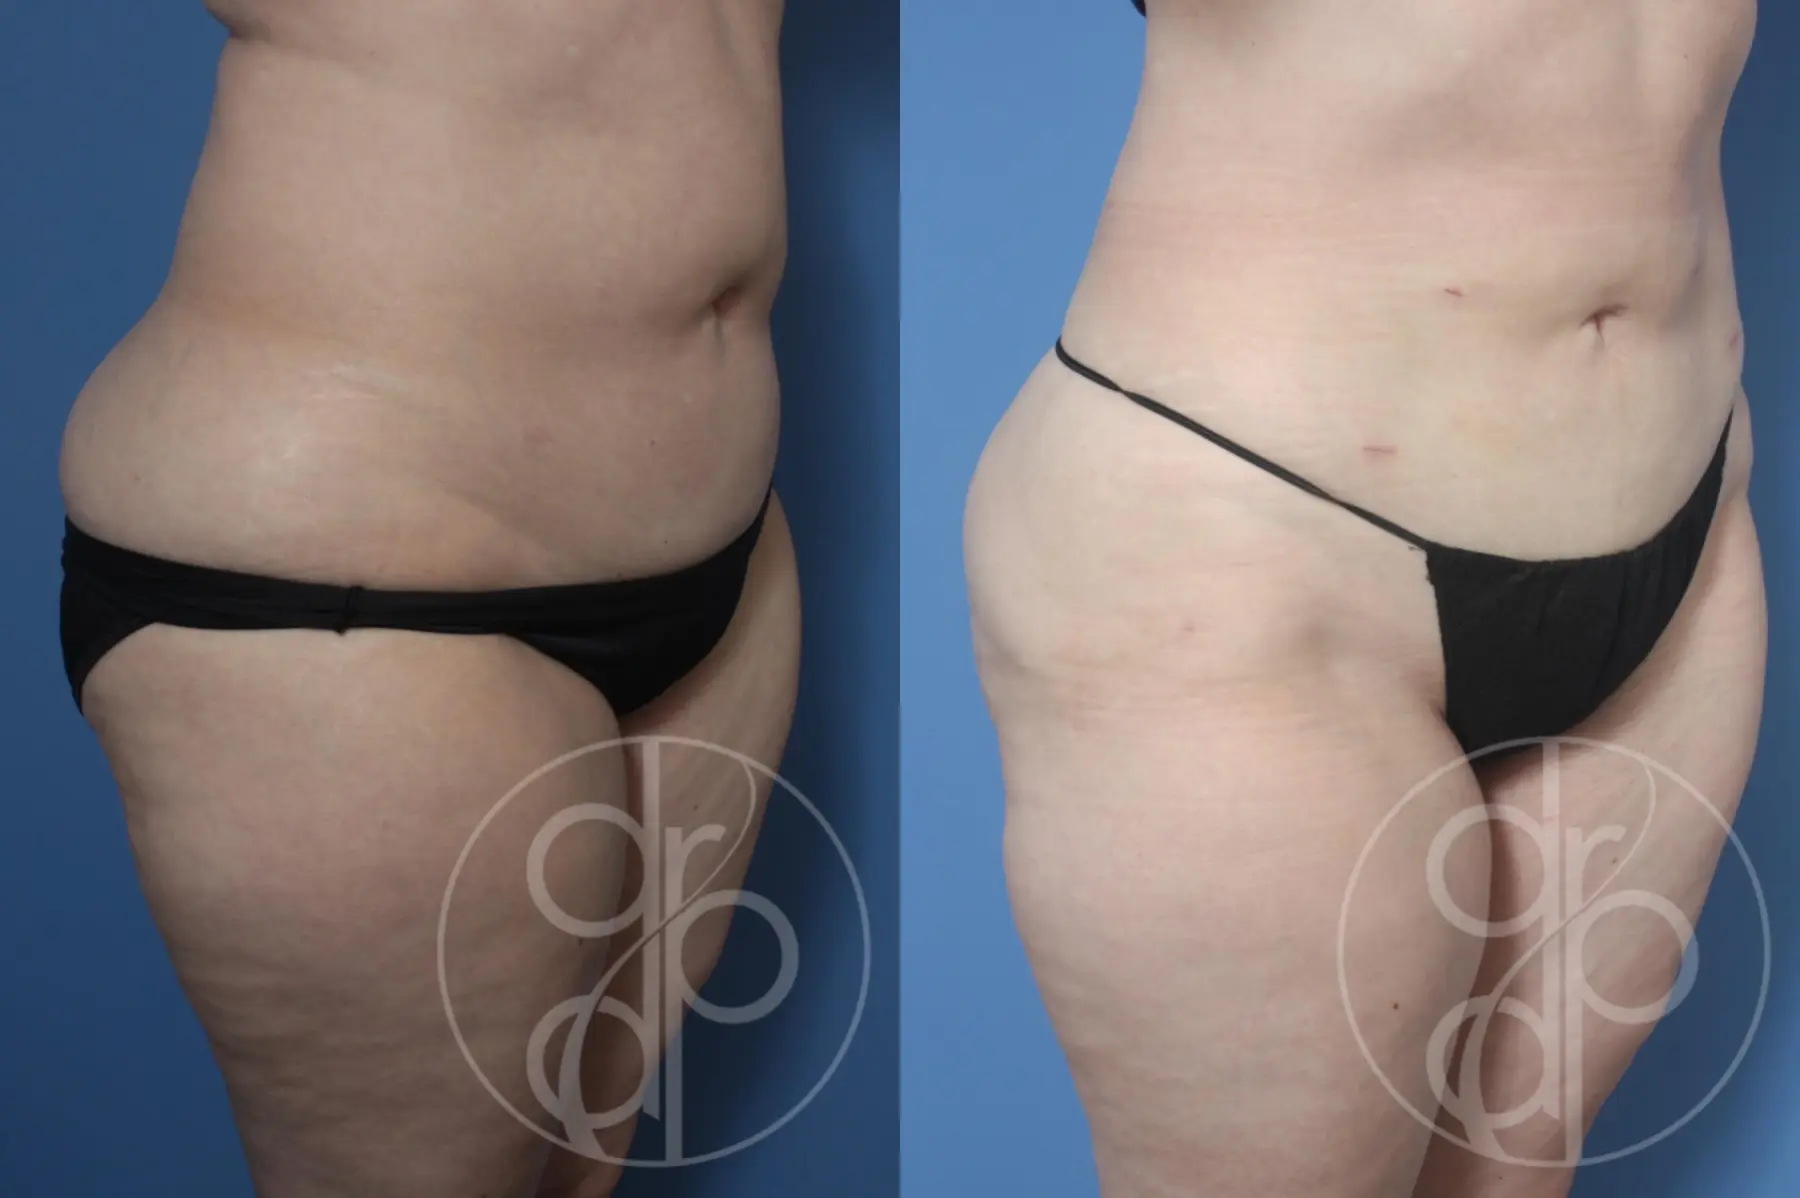 patient 13080 liposuction before and after result - Before and After 4